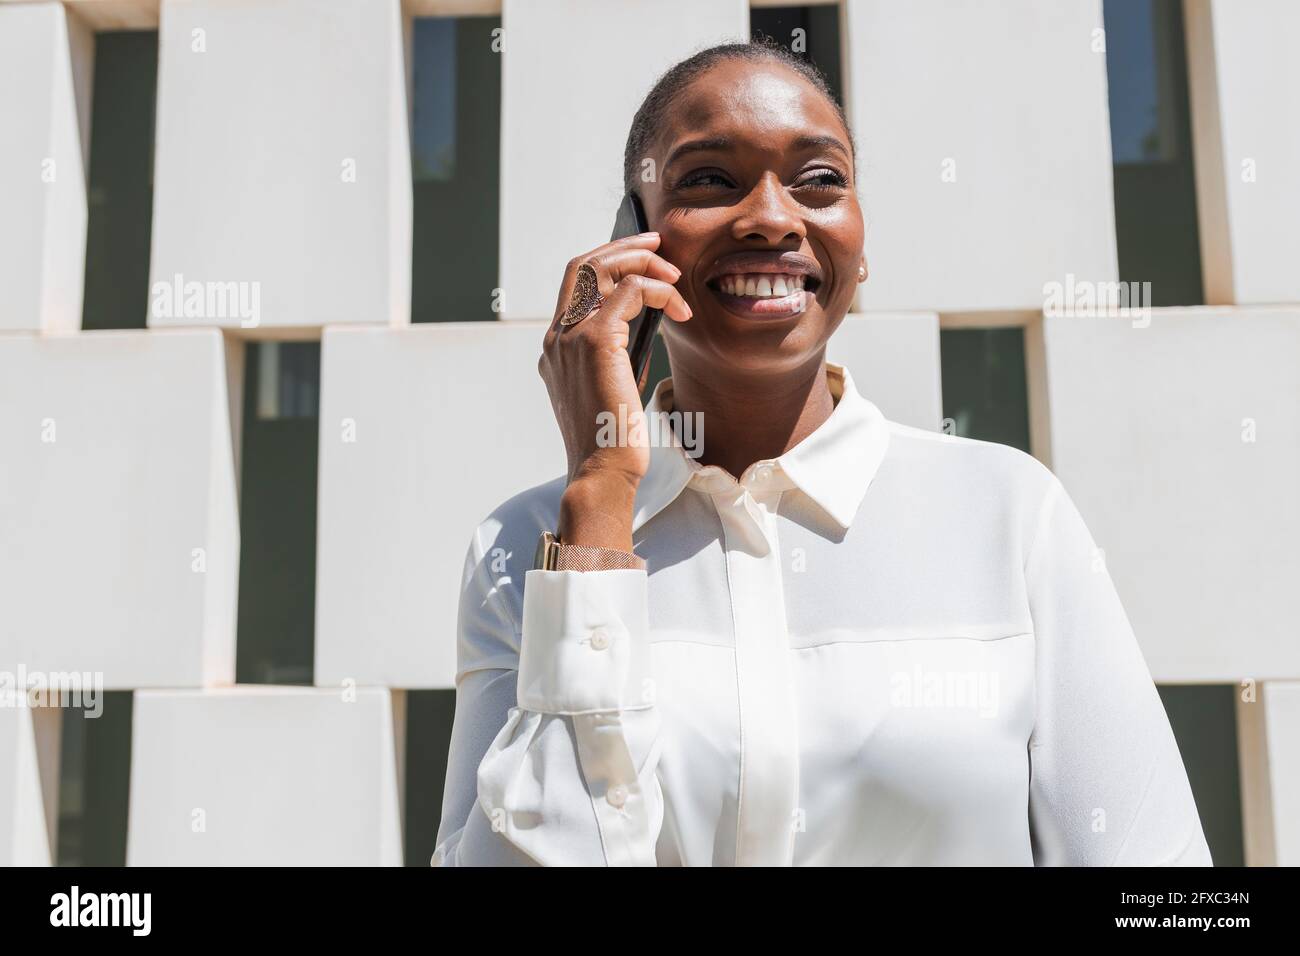 Female business person smiling while talking on mobile phone Stock Photo